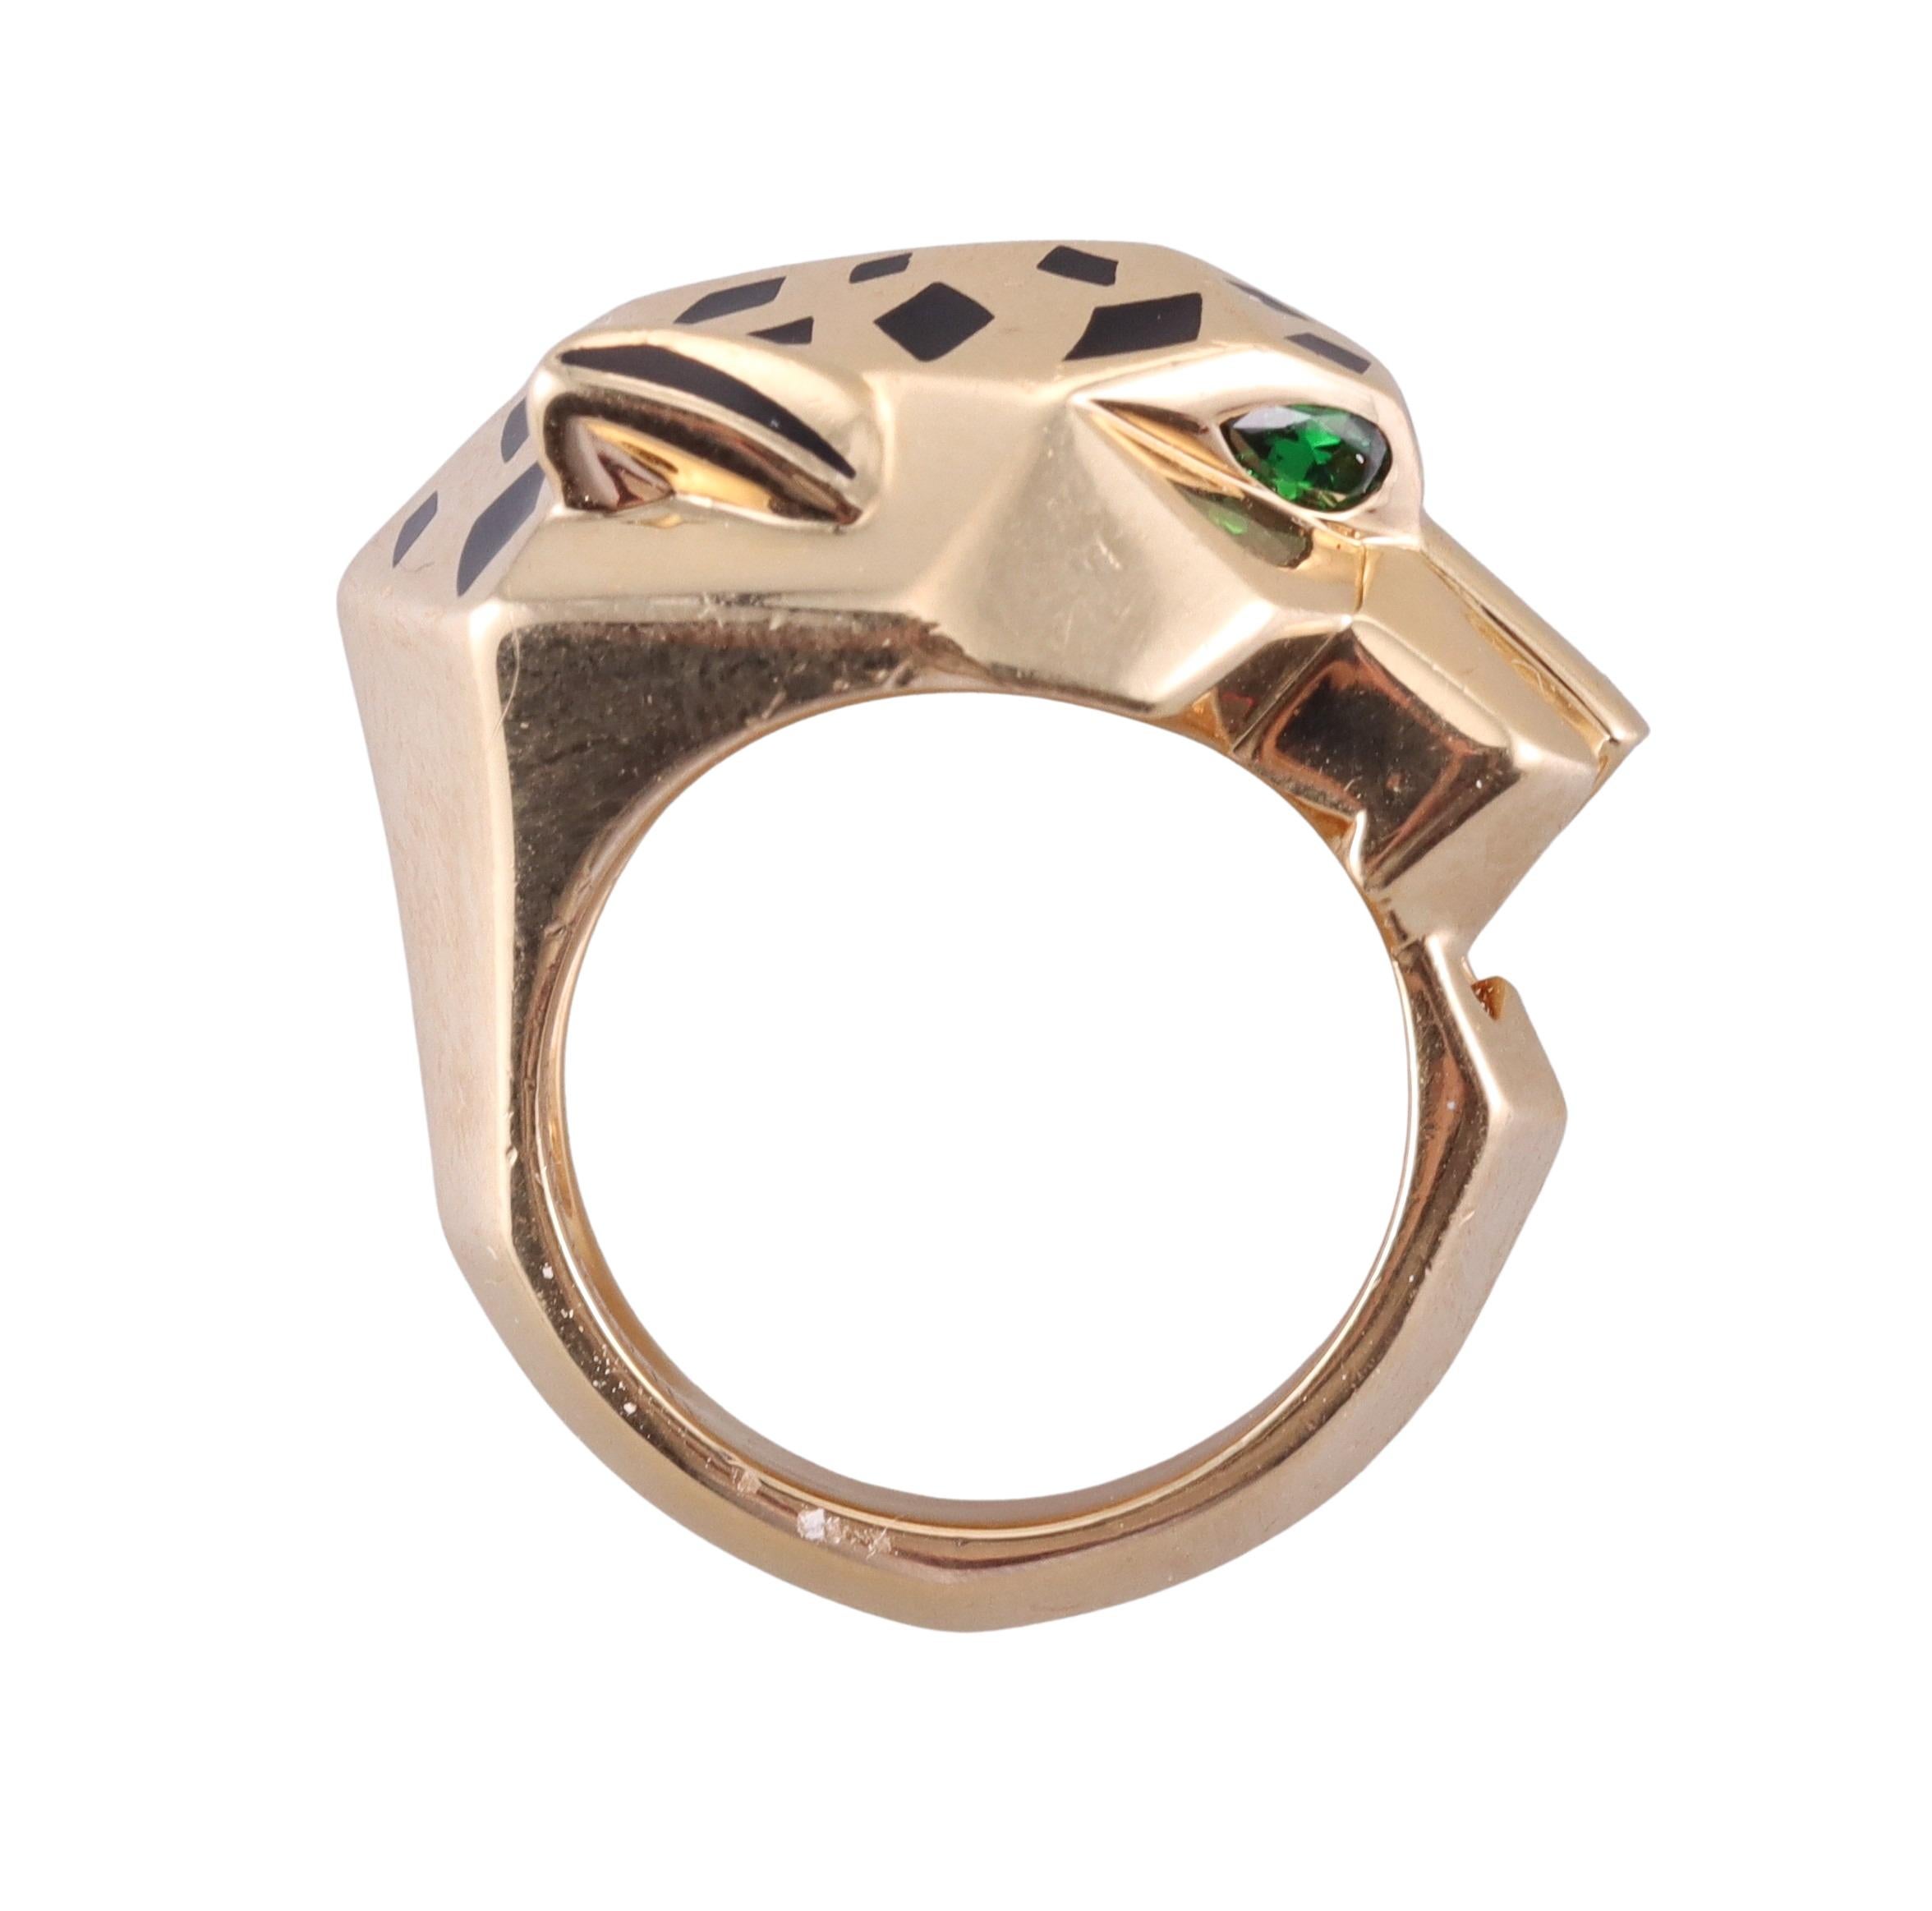 Iconic Panthere de Cartier 18k gold ring, decorated with tsavorite eyes and black enamel. Ring is a size 6.25 (Euro size 52), the top of the ring measures 0.75